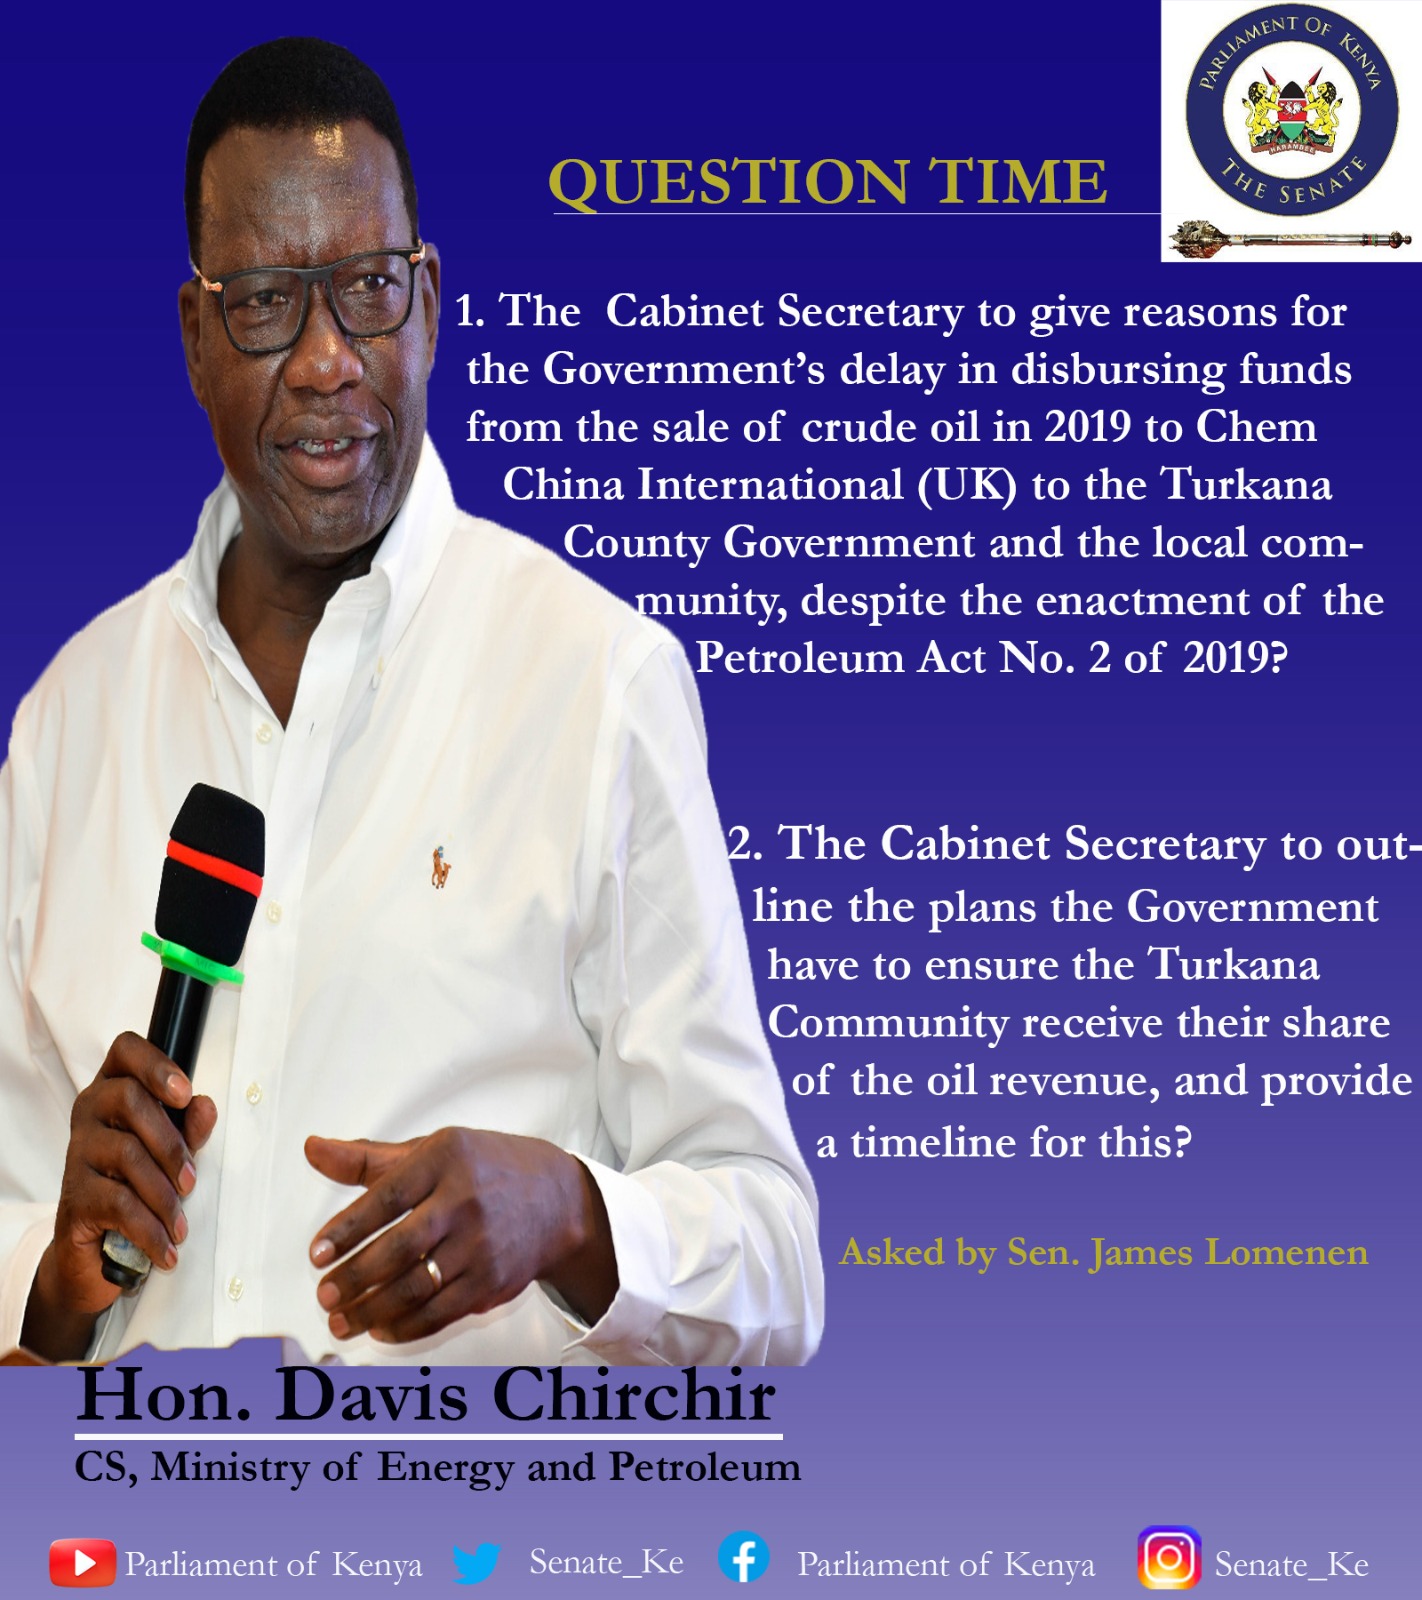 Cabinet Secretary for Energy will appear before the Senate tomorrow to answer questions in regards to his Ministry #QuestionTime